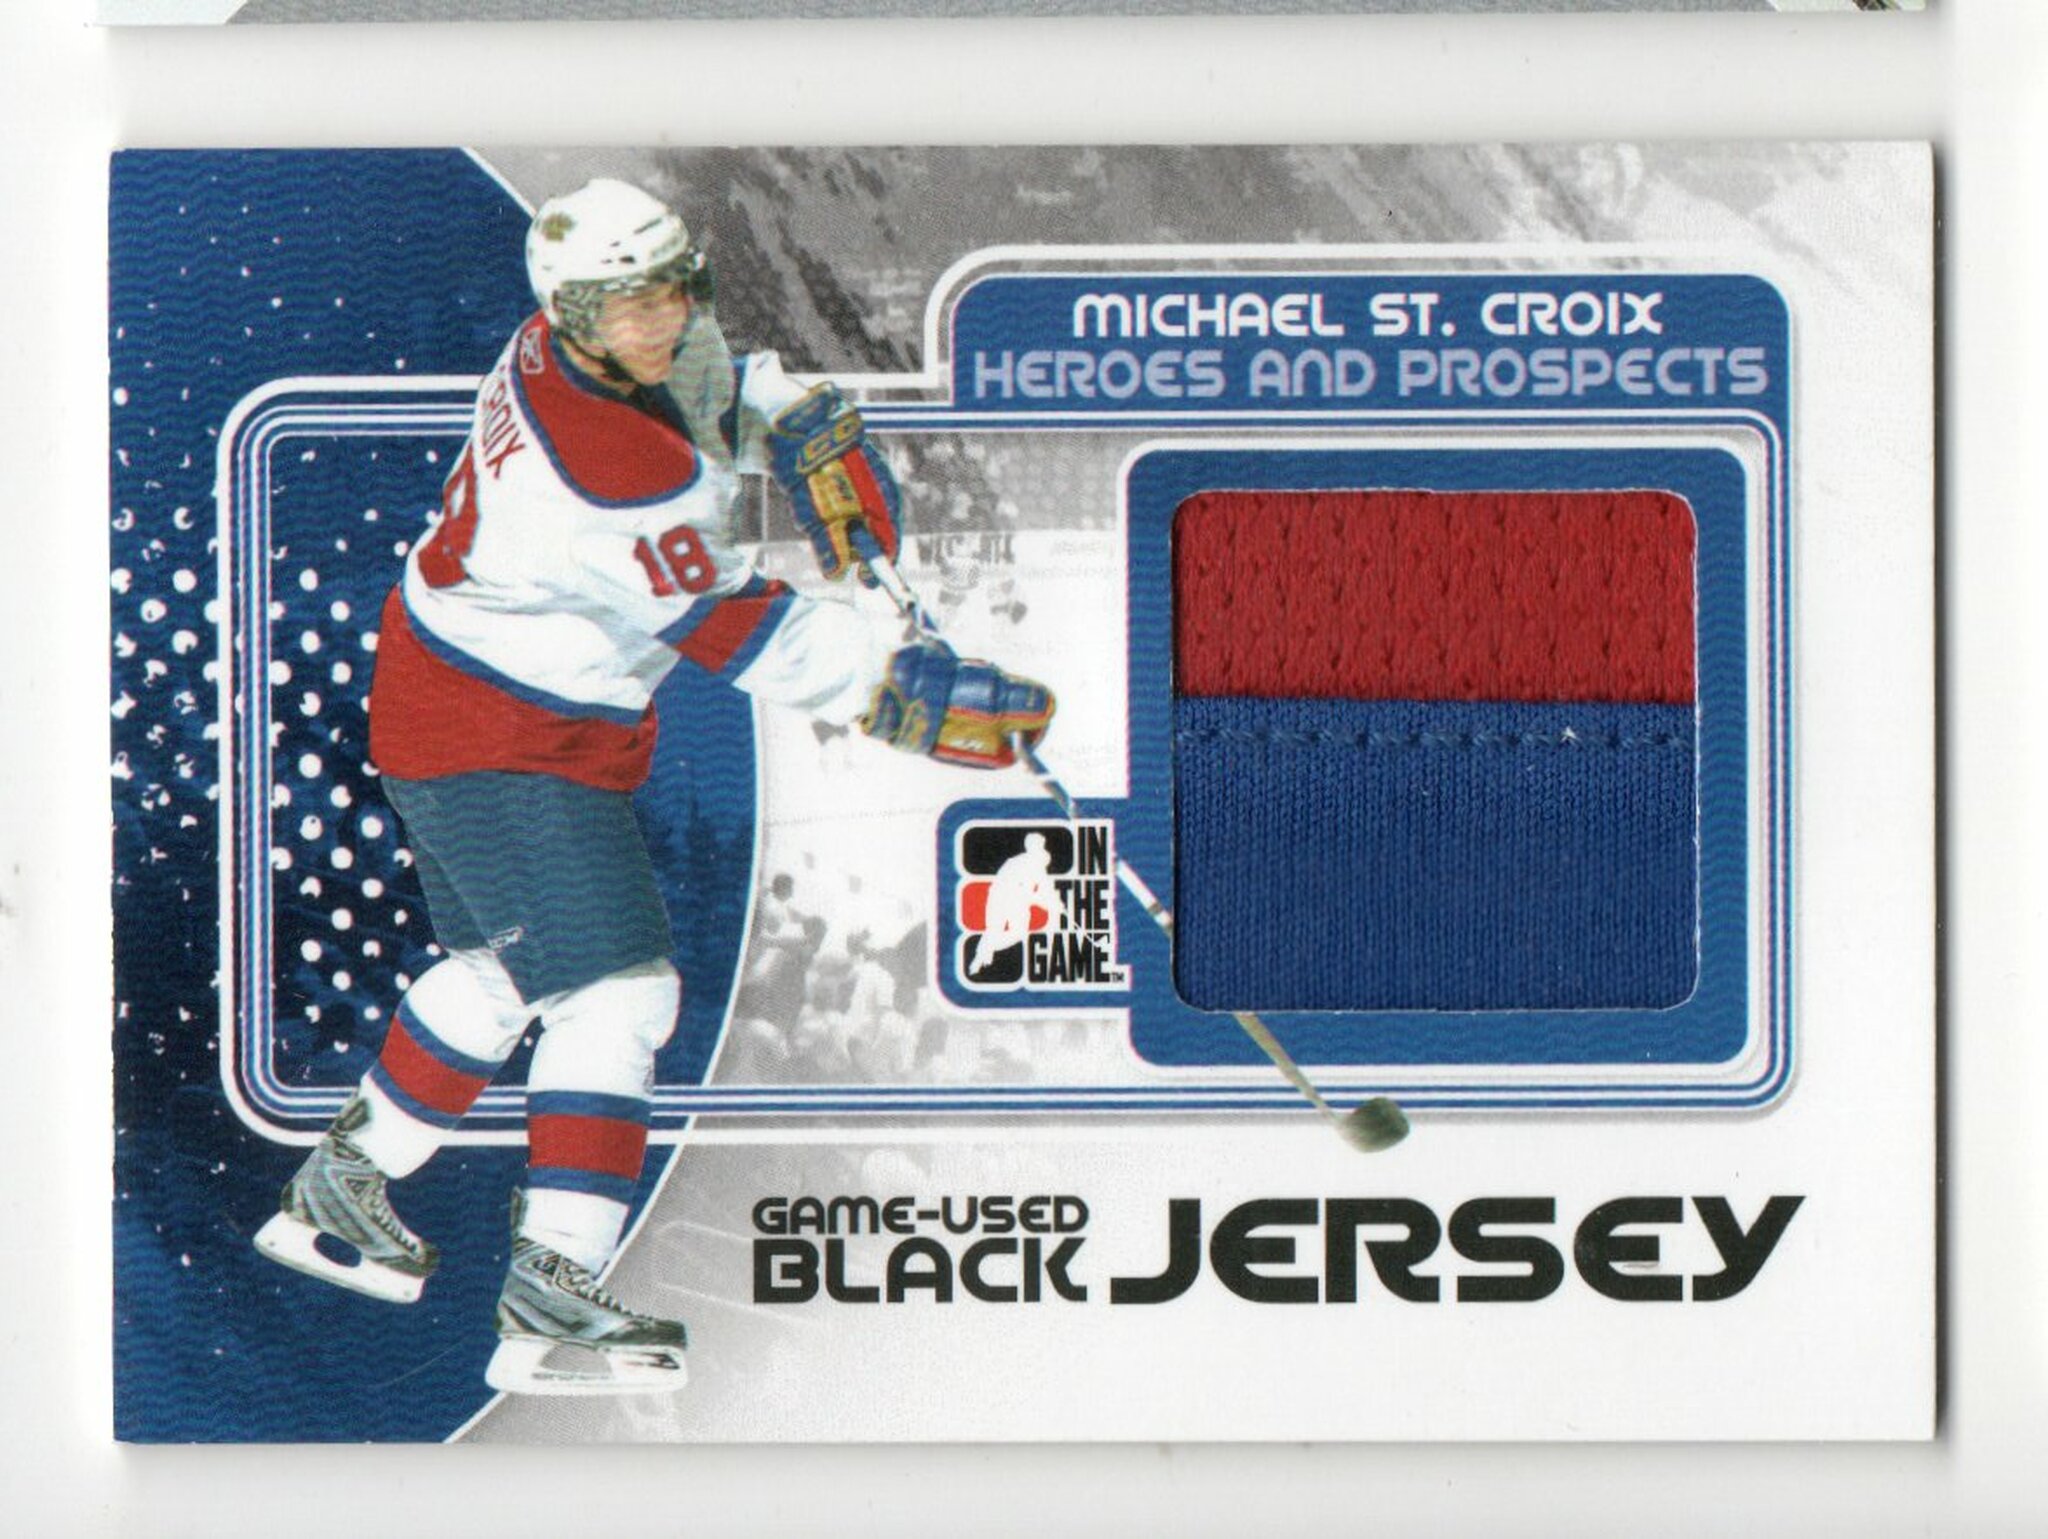 2010-11 ITG Heroes and Prospects Game Used Jerseys Black #M31 Michael St. Croix (30-X331-RANGERS)